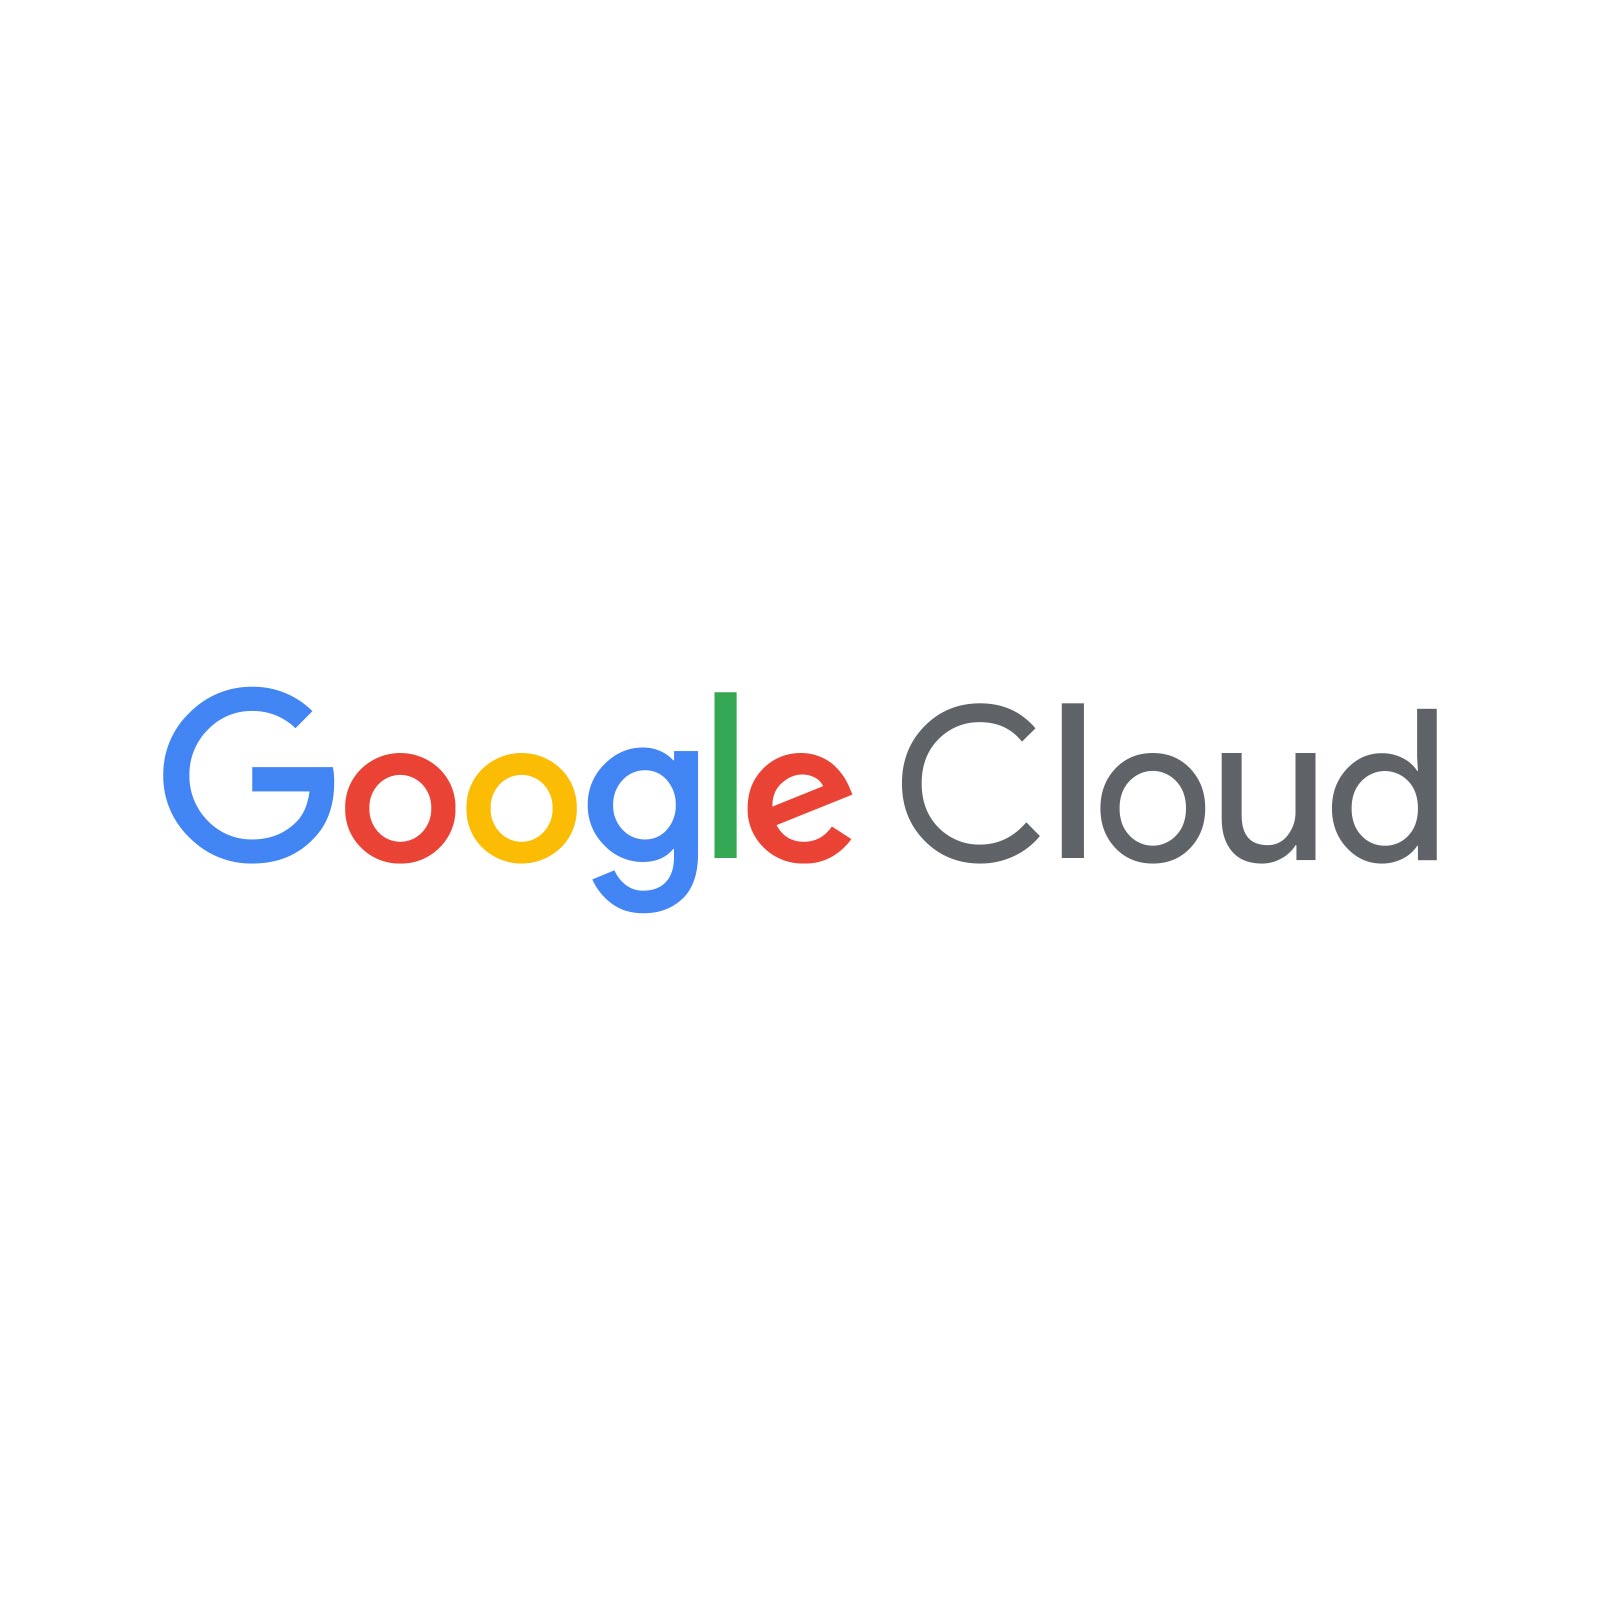 inthecloud.withgoogle.com